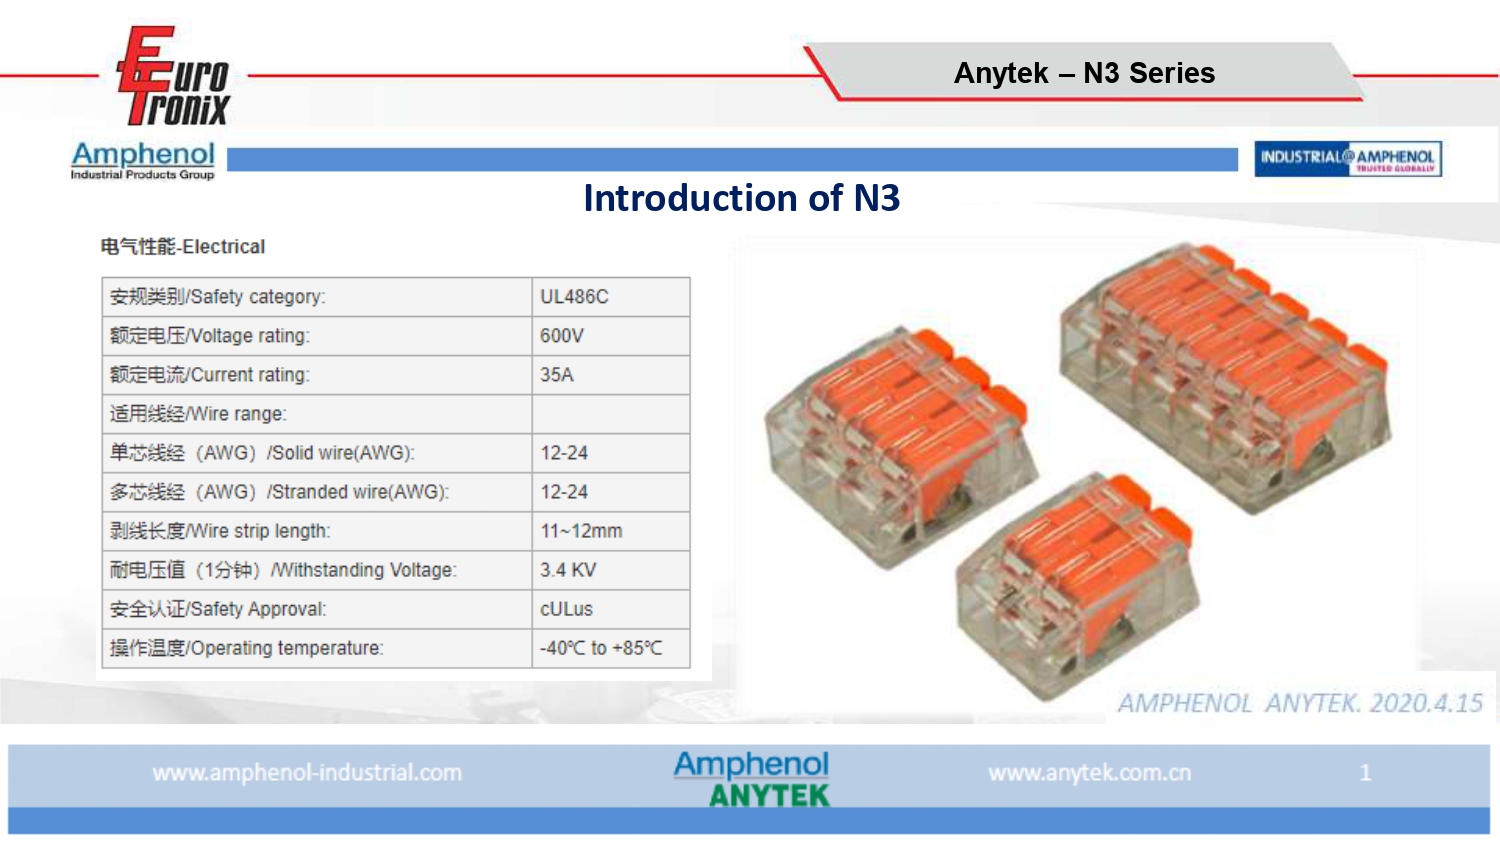 New N3 Series from Amphenol Anytek for lighting  and Smart Home applications